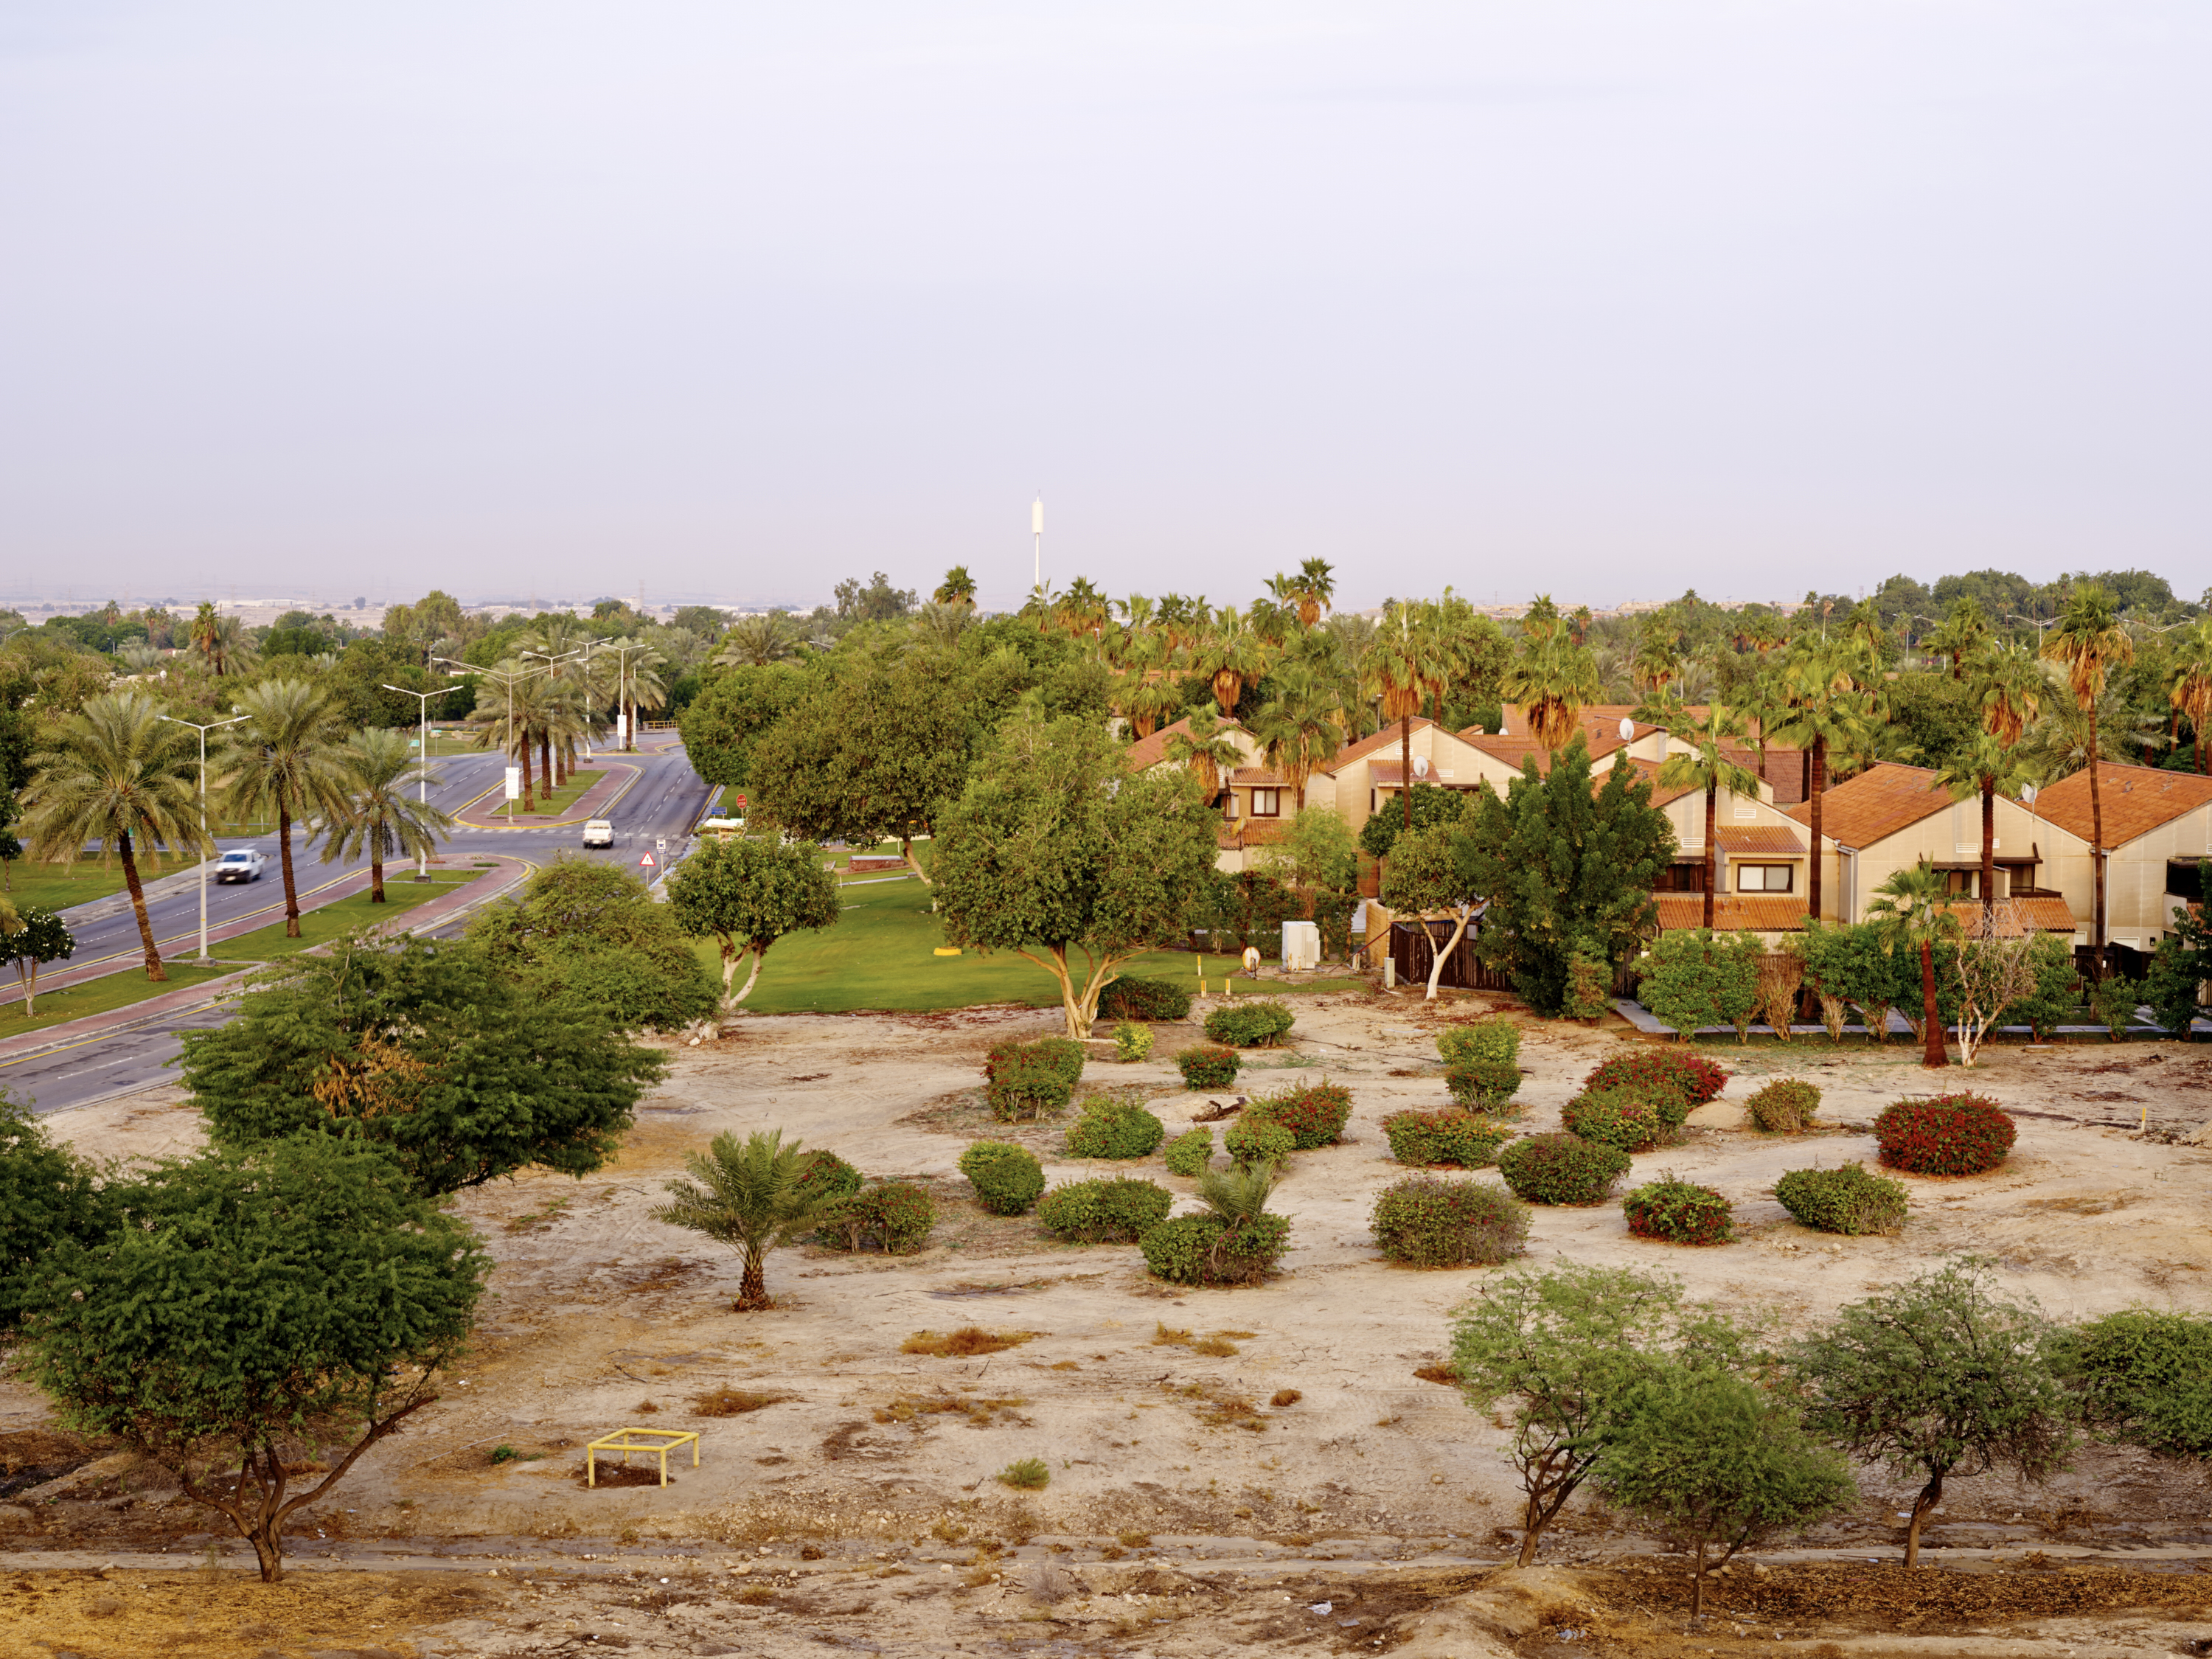 Dhahran Hills in the Residential Compound of Dhahran, Operated by Saudi Aramco.